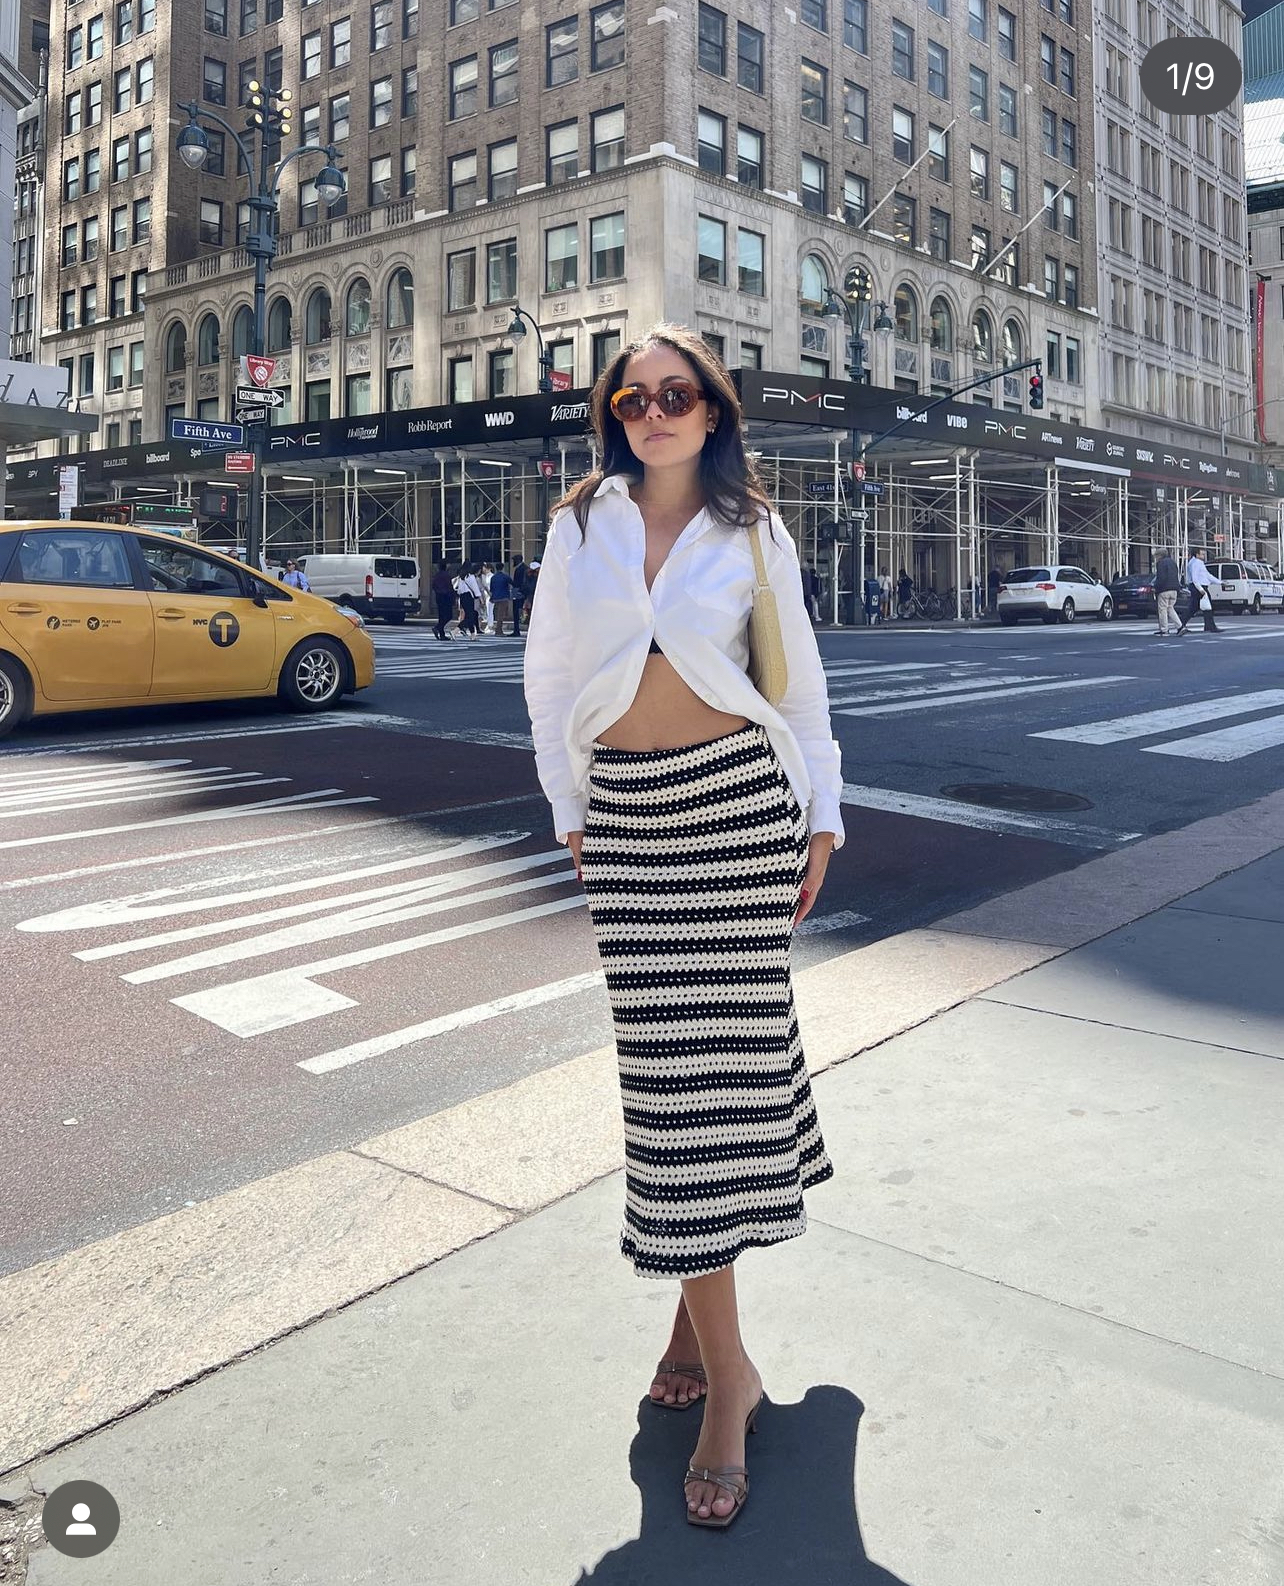 15 All-White Outfit Ideas — Cute Outfit Ideas for Summer 2019